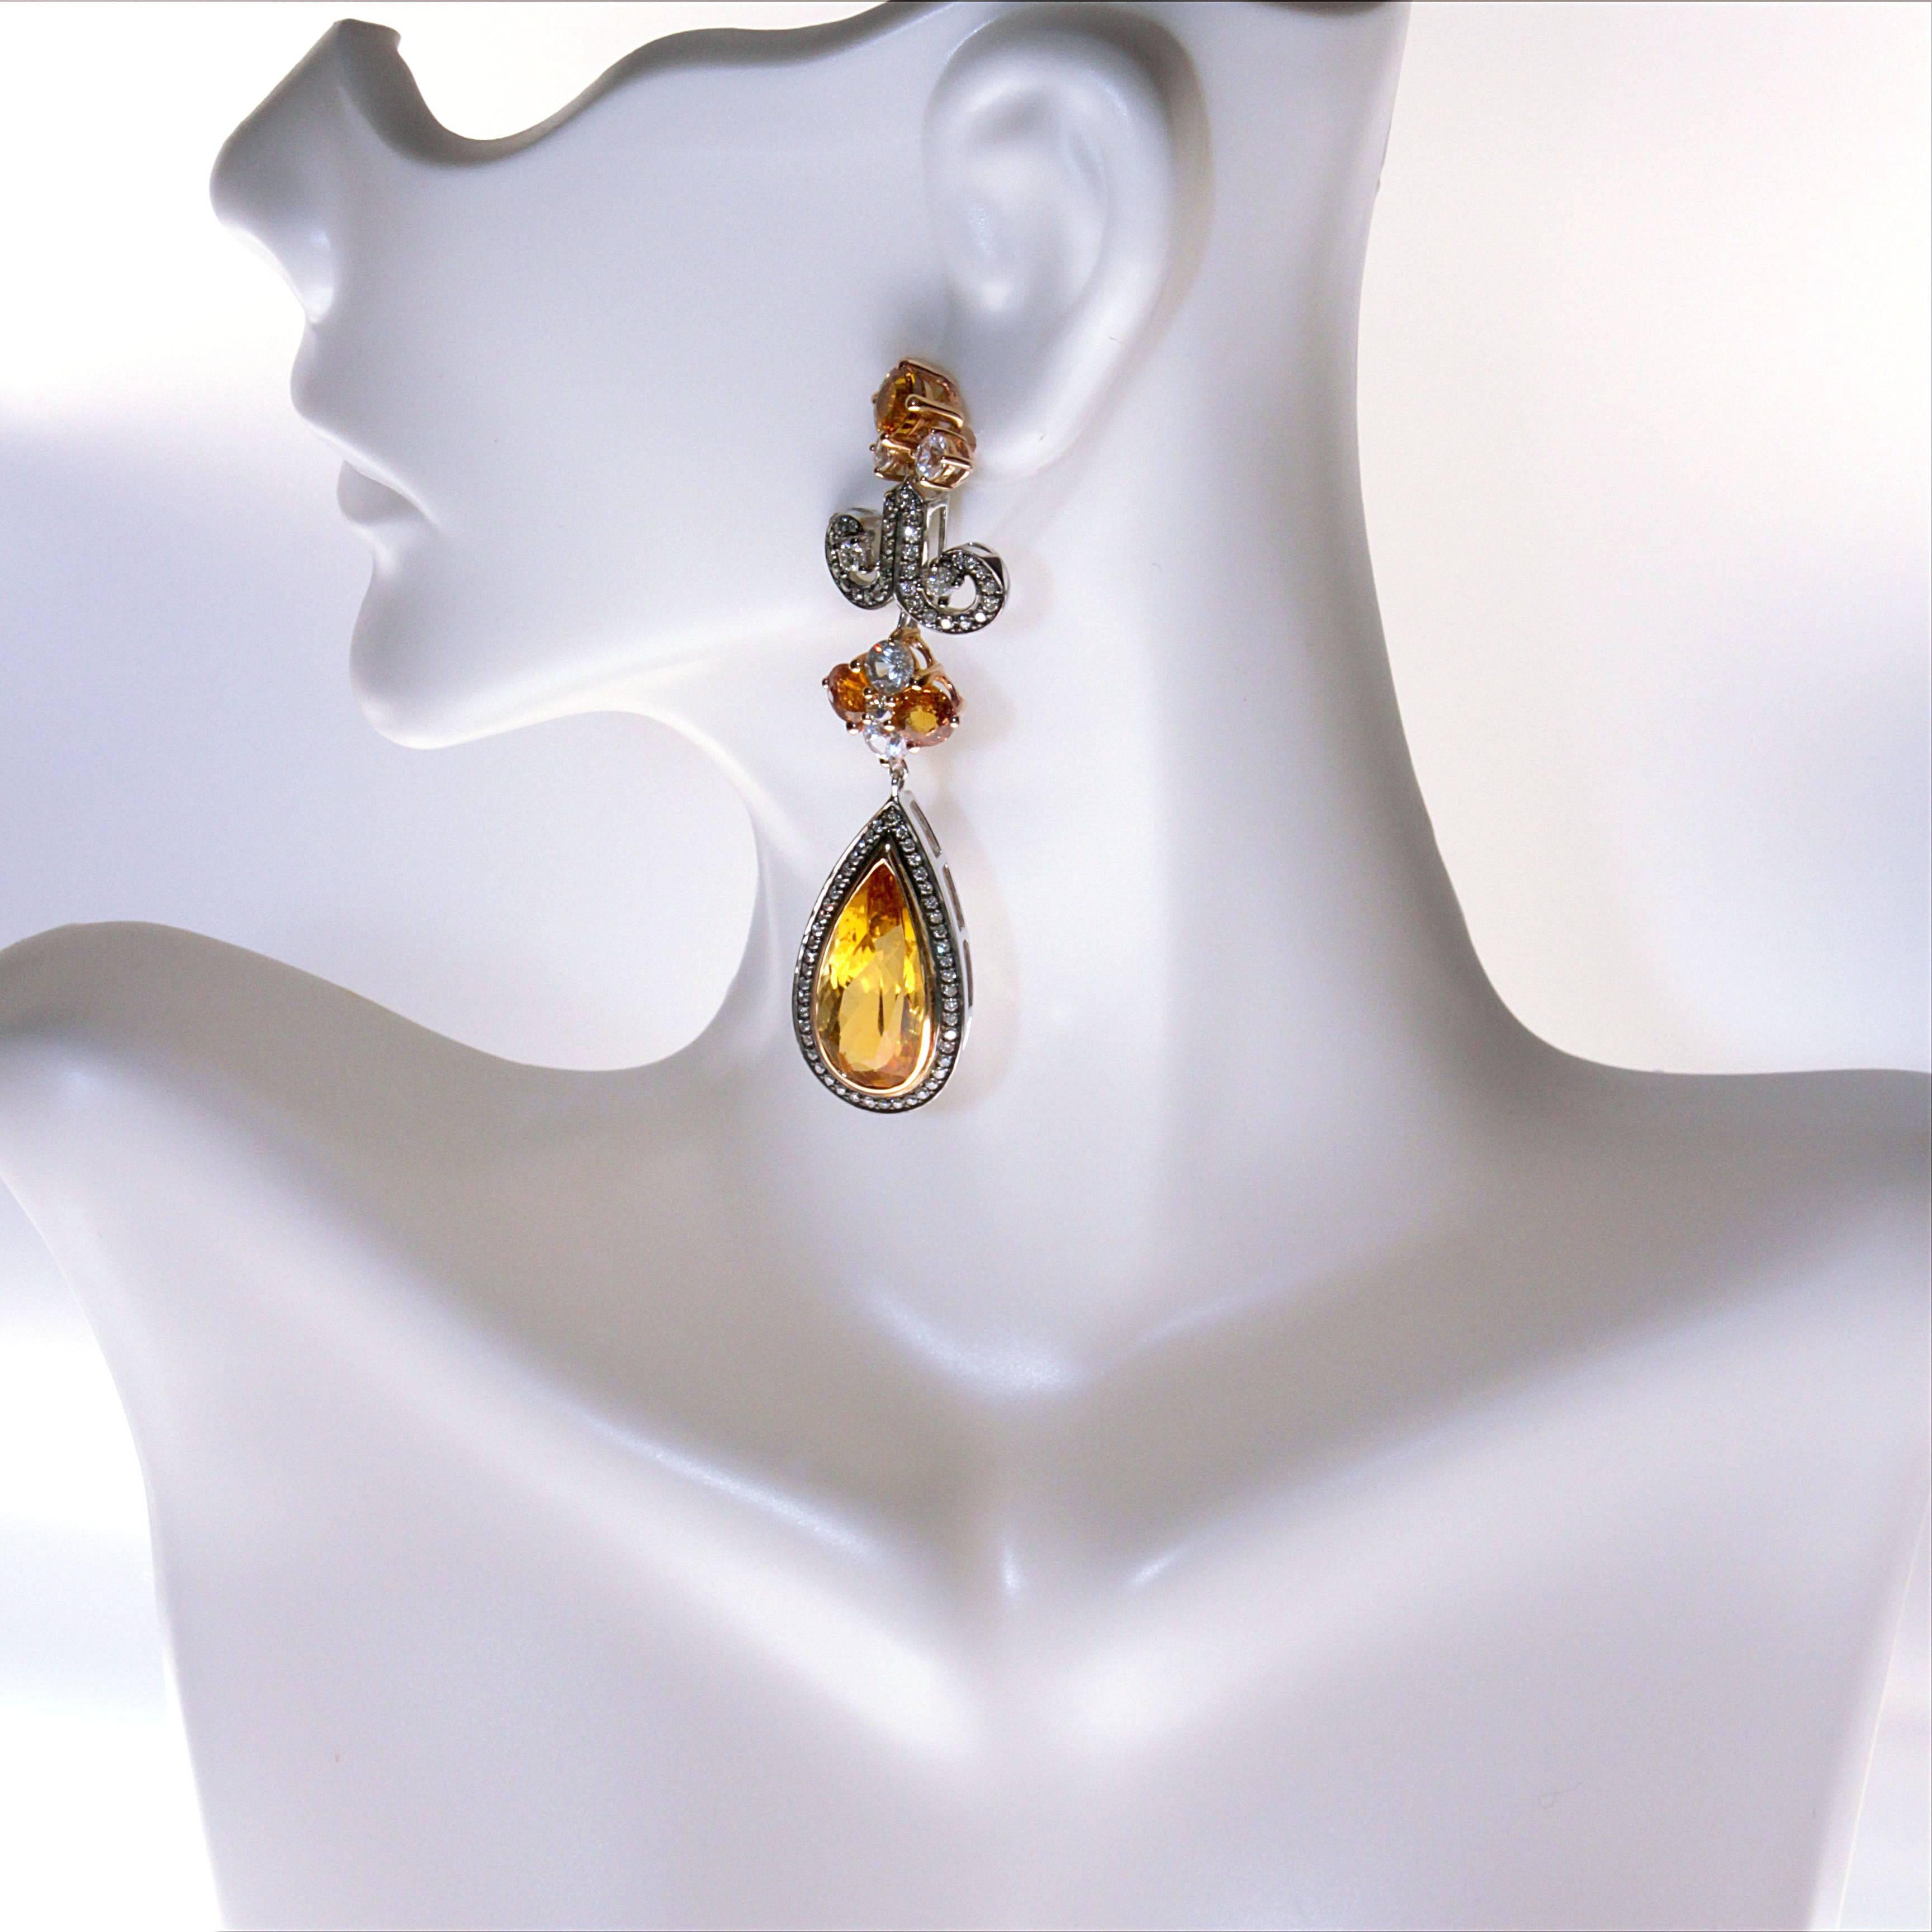 Zorab reinvents the drop earring with this stunning 18.24 Carat Citrine Quartz design set on 18 Karat Gold and Palladium. The center stones are surrounded by 2.50 Carats of White Zircon (not to be mistaken with zirconia) and 1.40 Carats of White